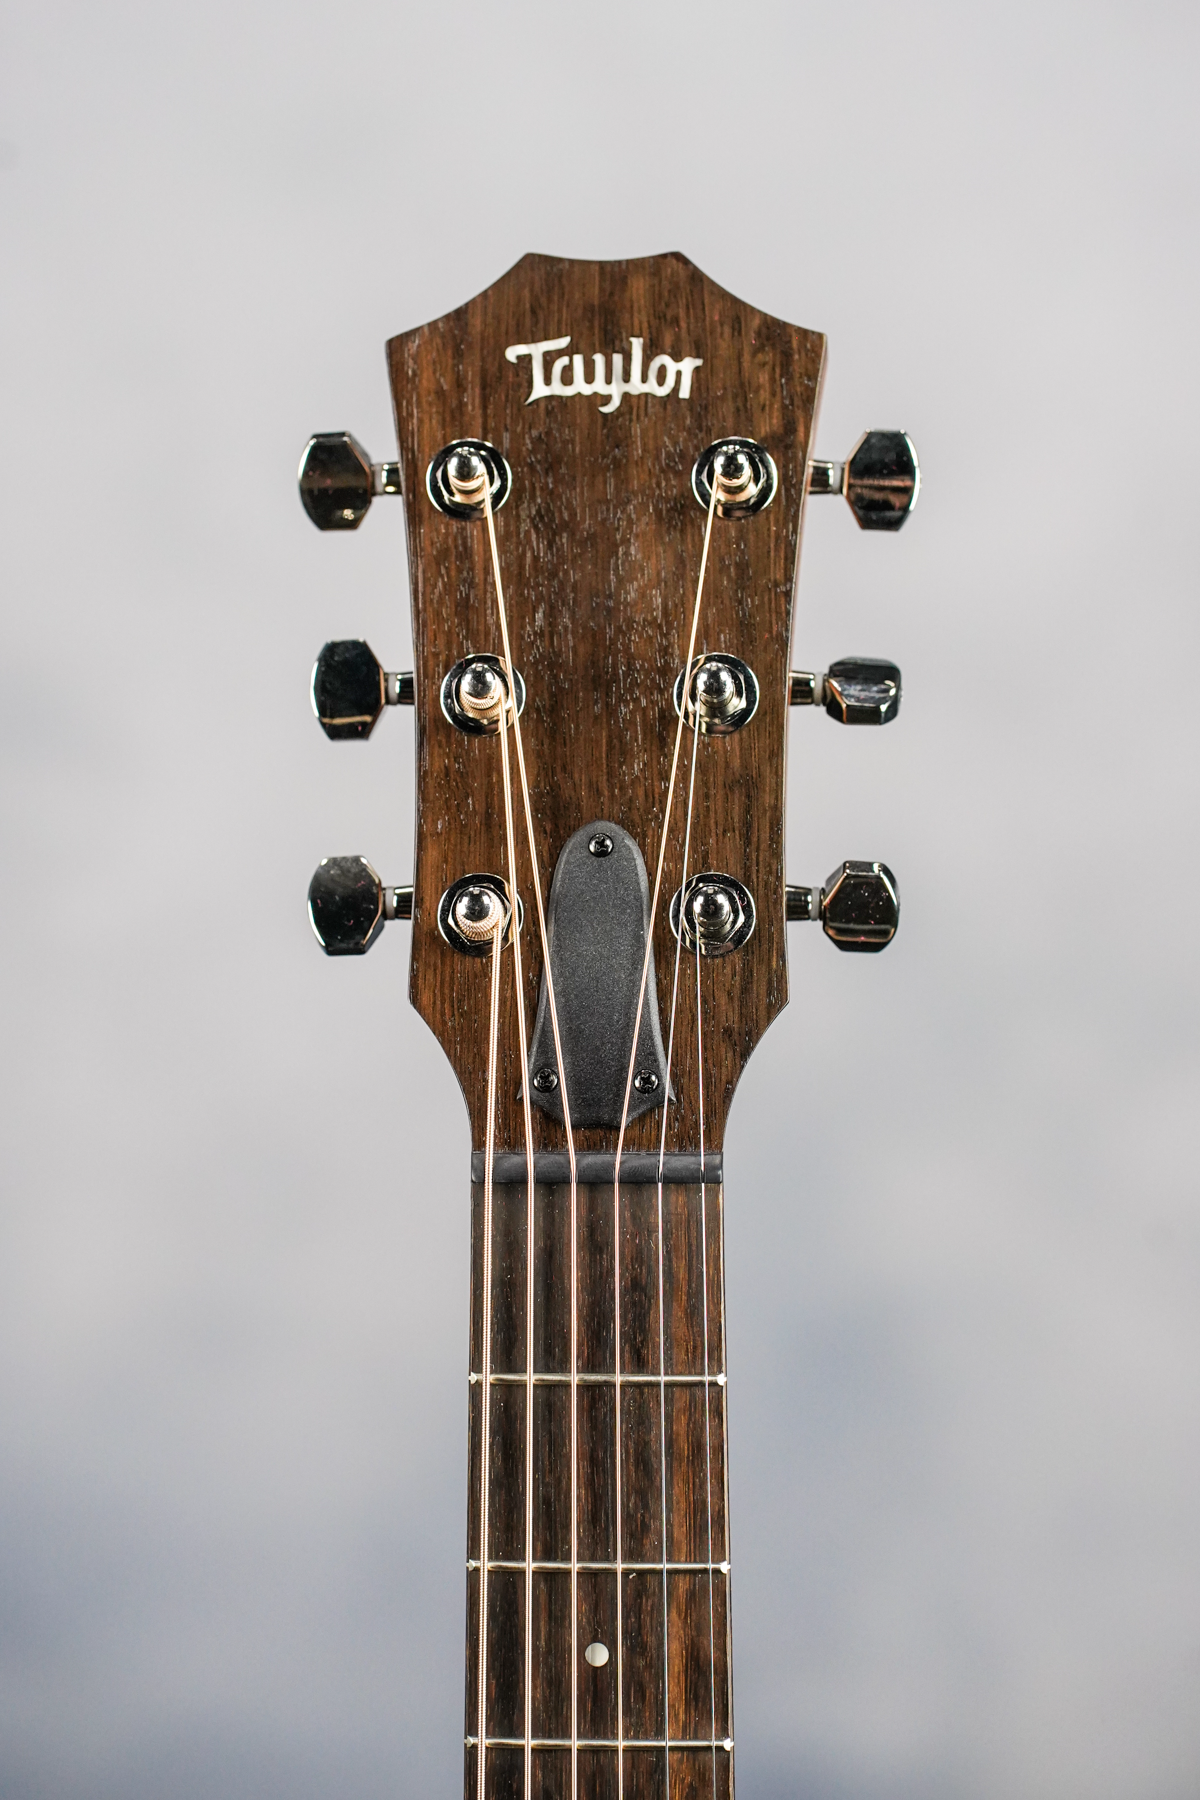 Taylor GTE Blacktop Grand Theater Acoustic-Electric Guitar